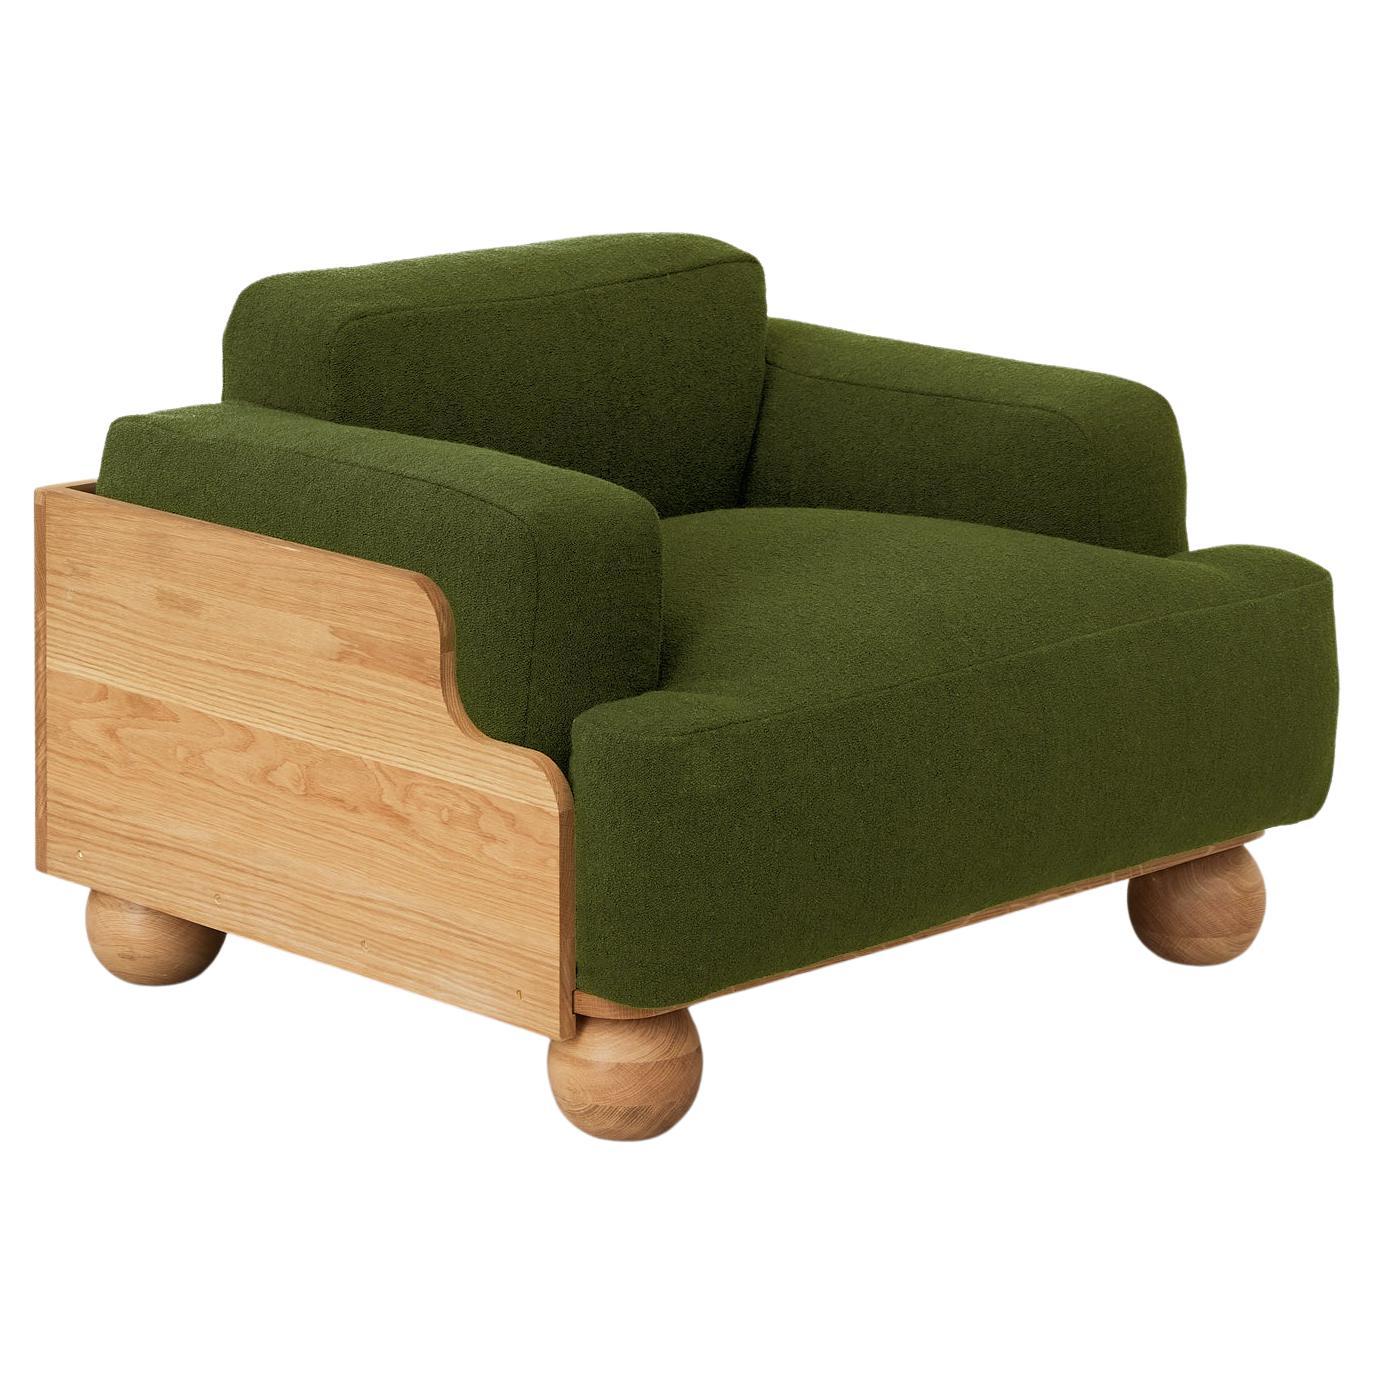 Cove Armchair in Woodland Green For Sale